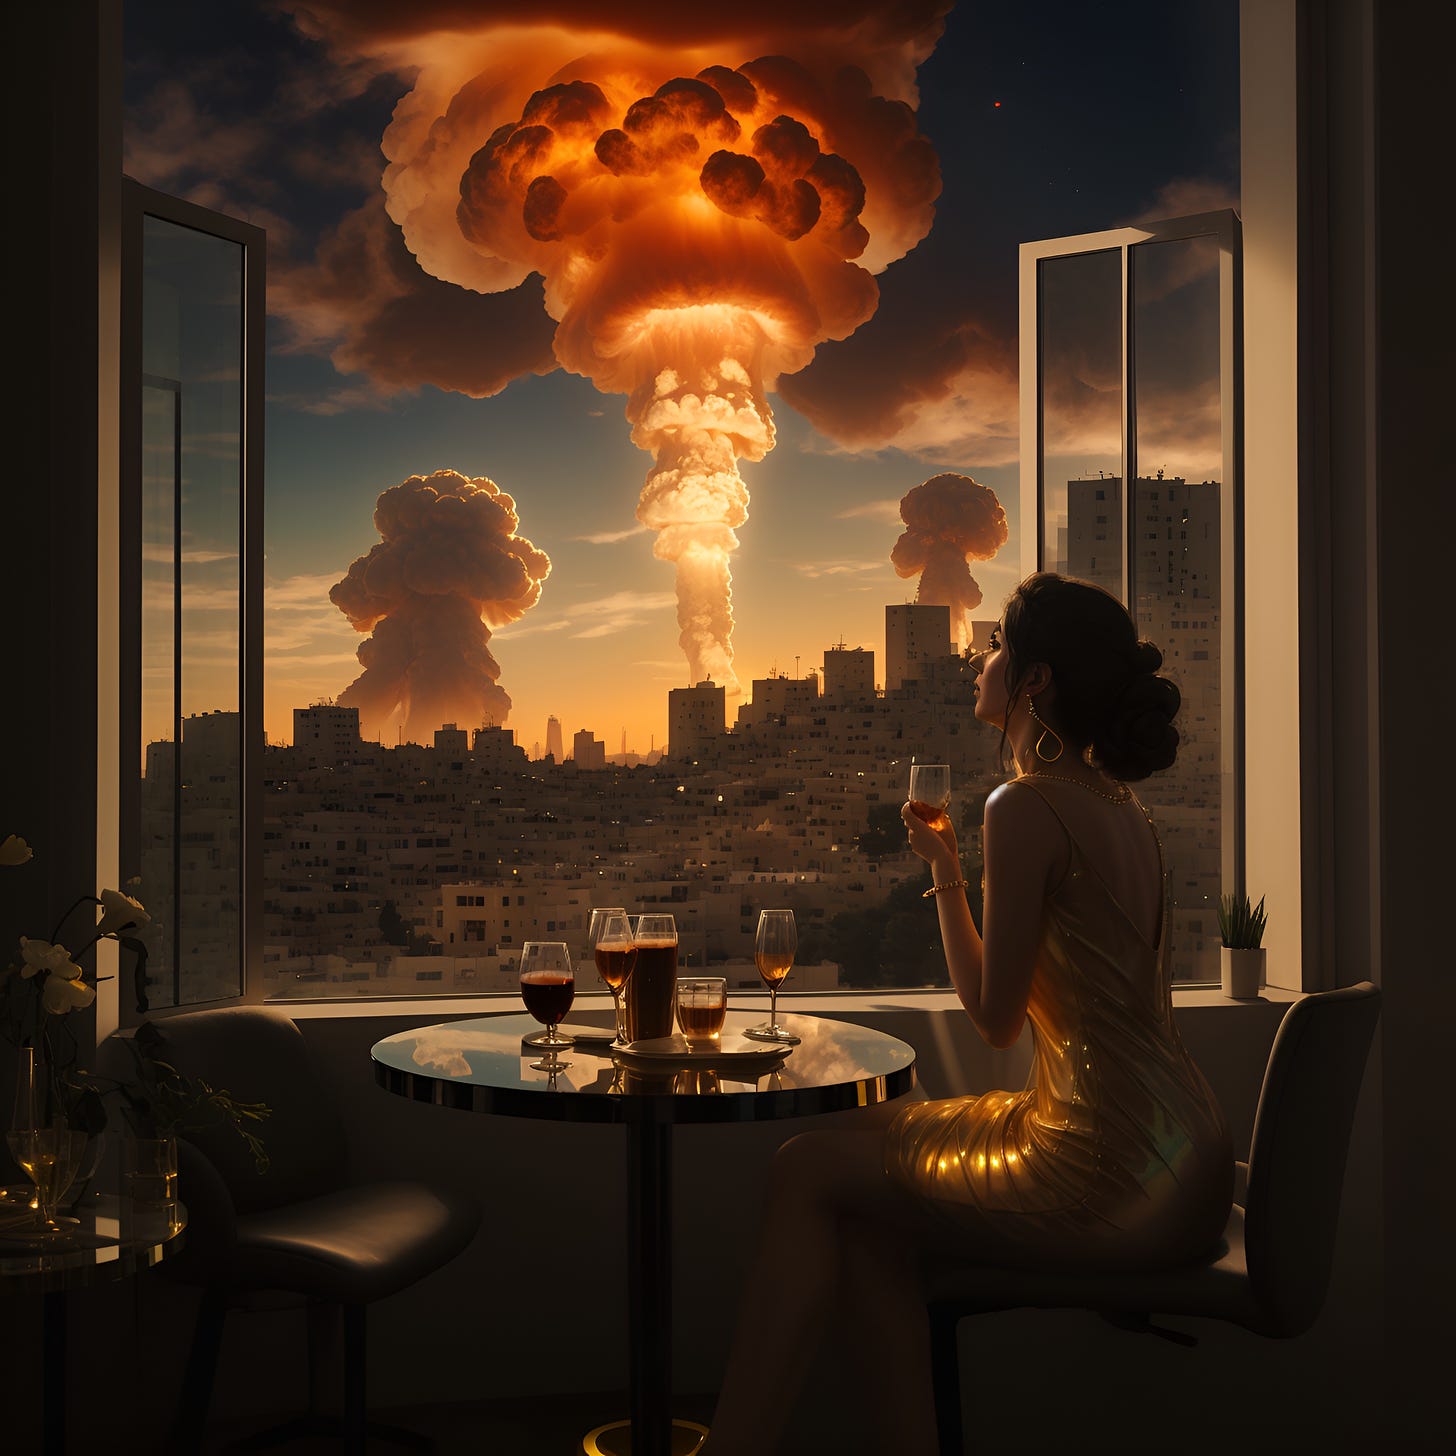 Woman drinking her morning coffee watches Nuclear mushroom cloud out the window. A pretty, slender professional woman in a simple shimmering transparent iridescent dress, wearing gold and diamond earrings, and a pearl necklace. She is facing out the tall glass doors of her Jerusalem apartment.  It is sunset over the city.  In the distance looms a nuclear mushroom cloud.  